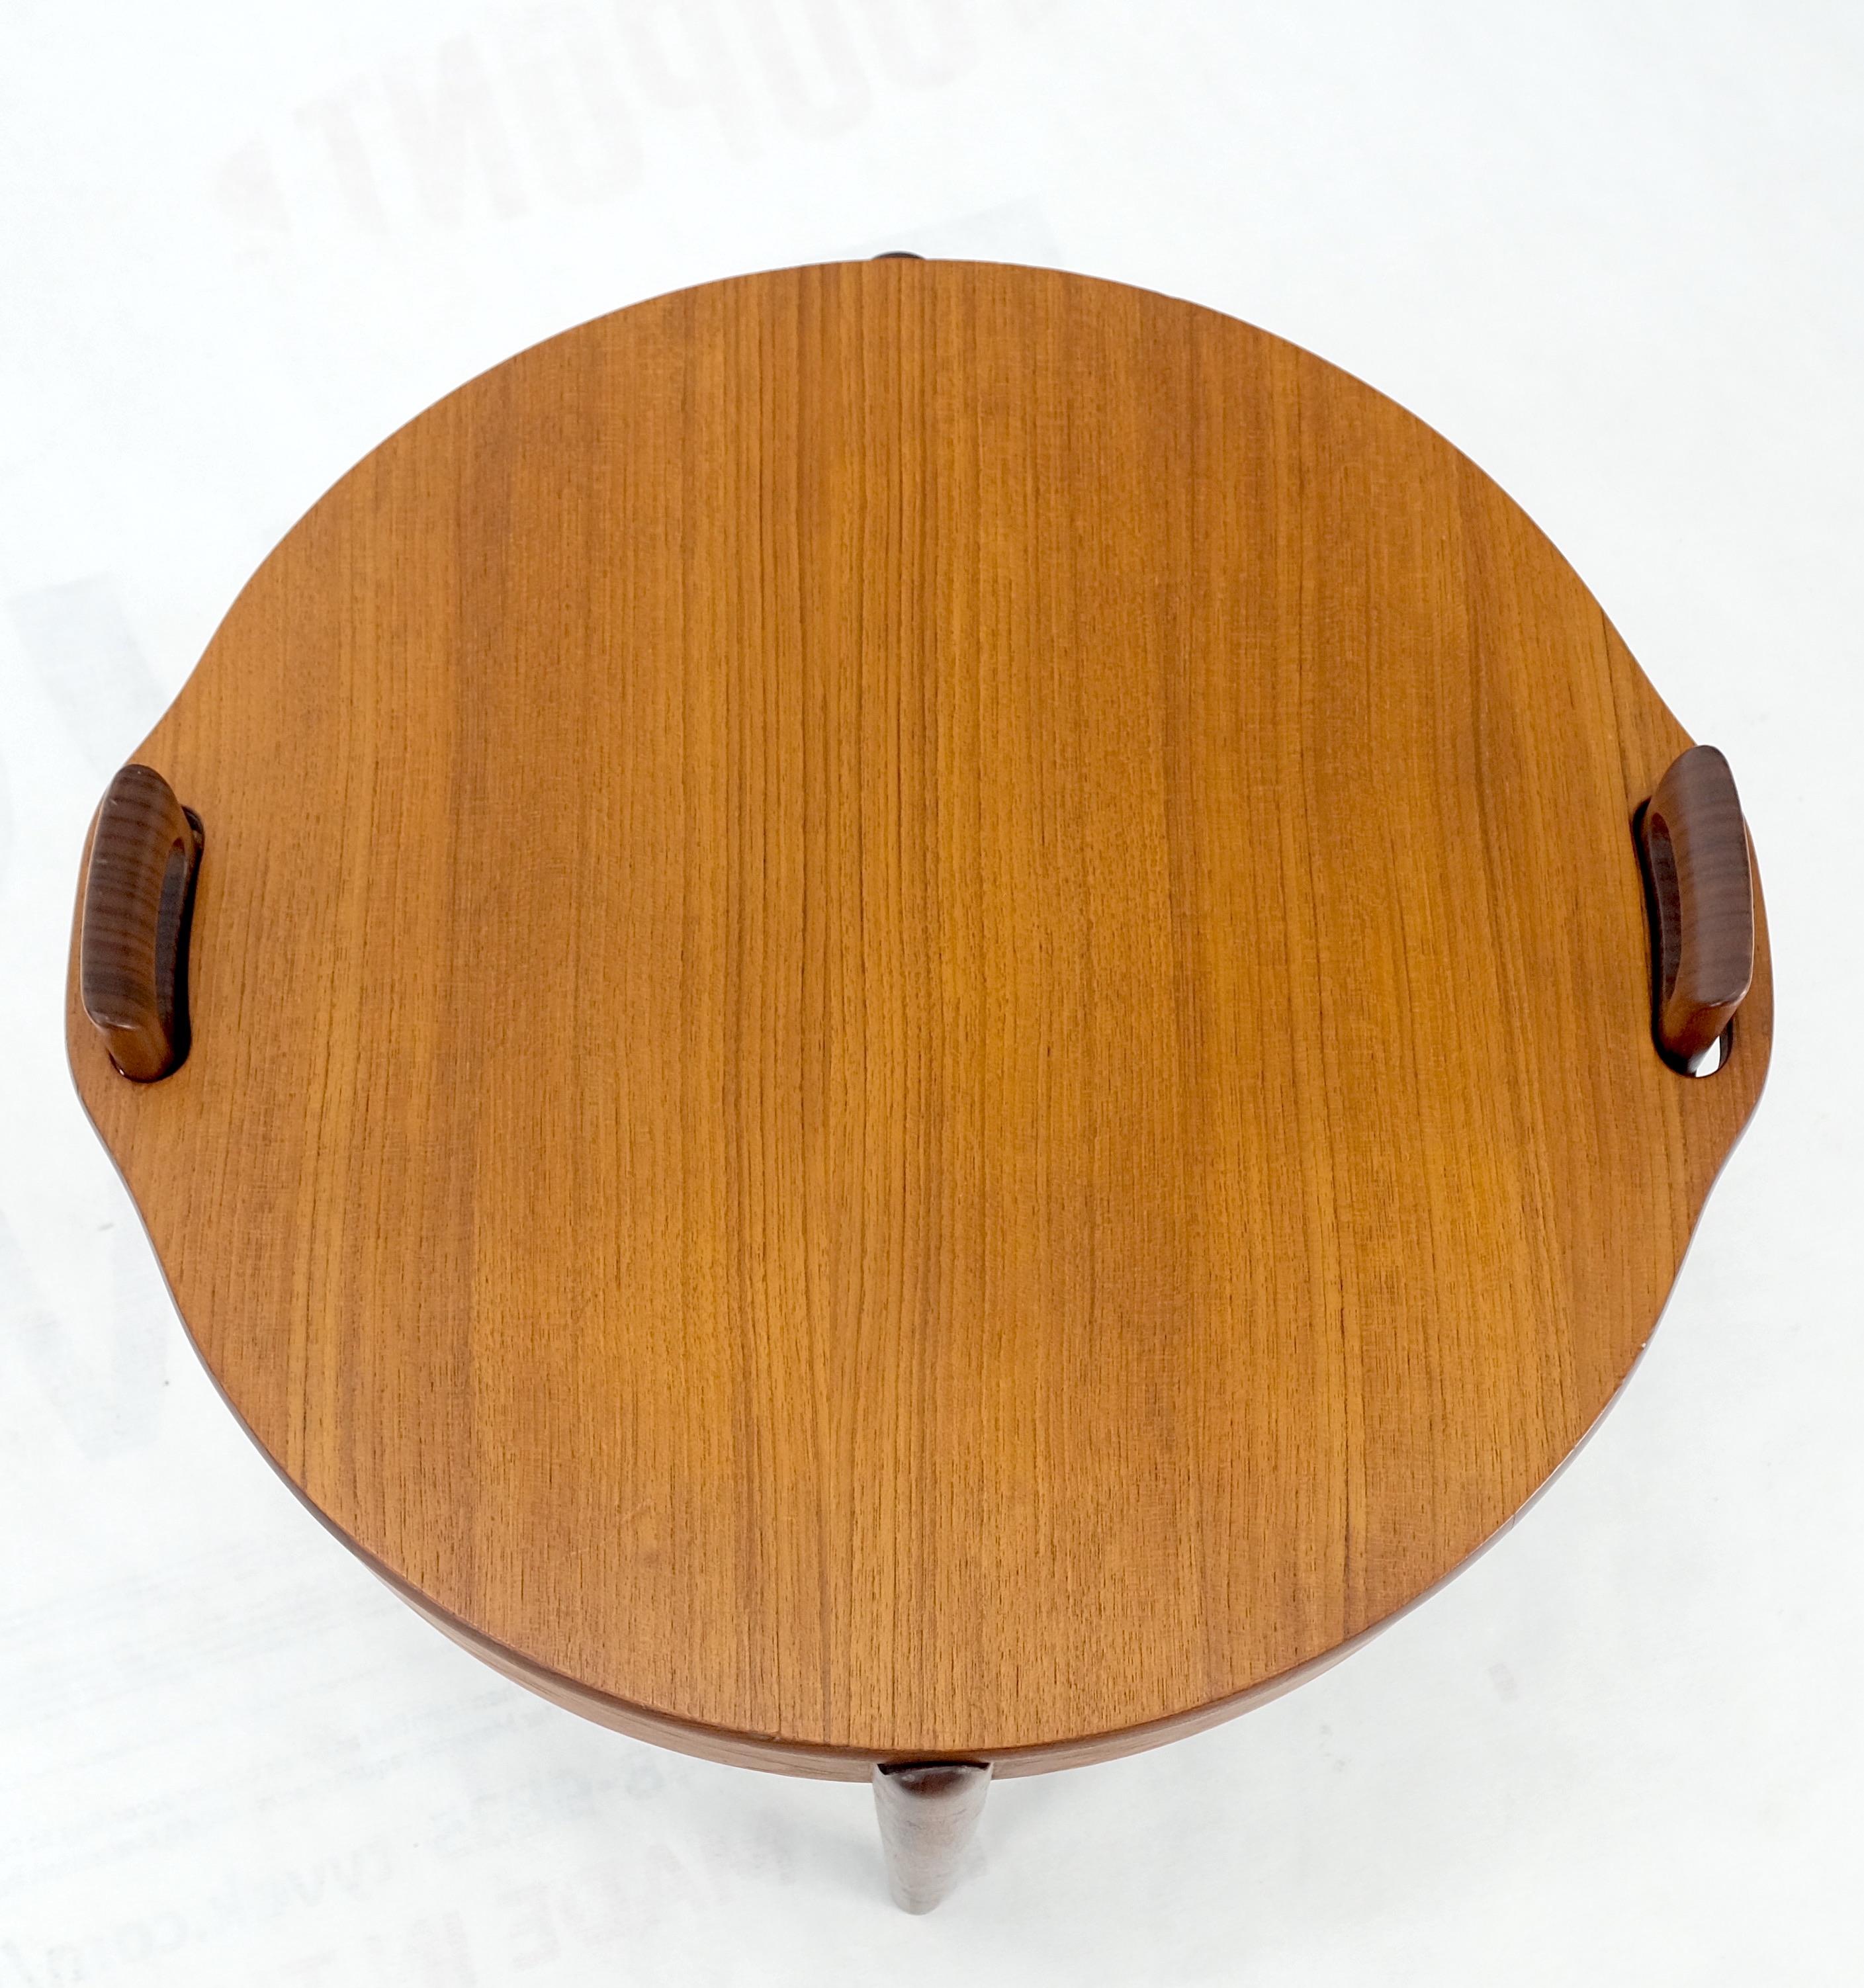 Danish Mid-Century Modern Teak Sewing Stand Table Bench Flip Top by Hansen Mint! For Sale 3